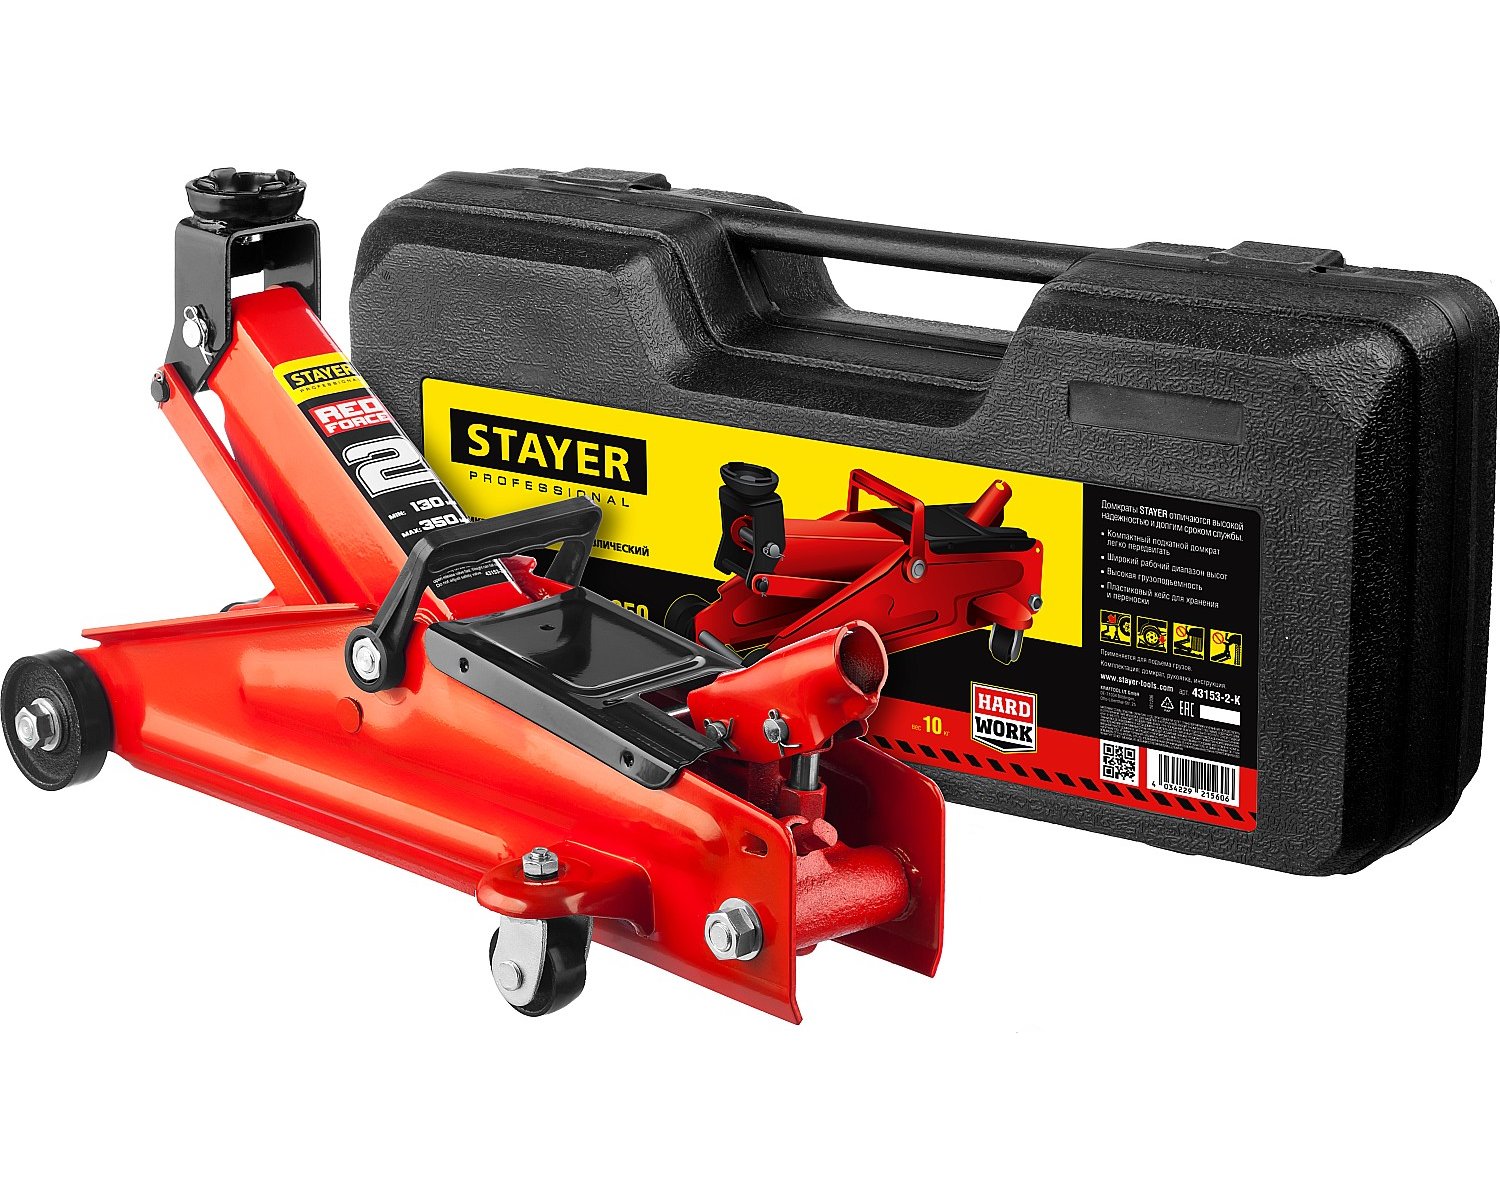       STAYER R-28 RED FORCE   2 130-350 43153-2- (43153-2-K)